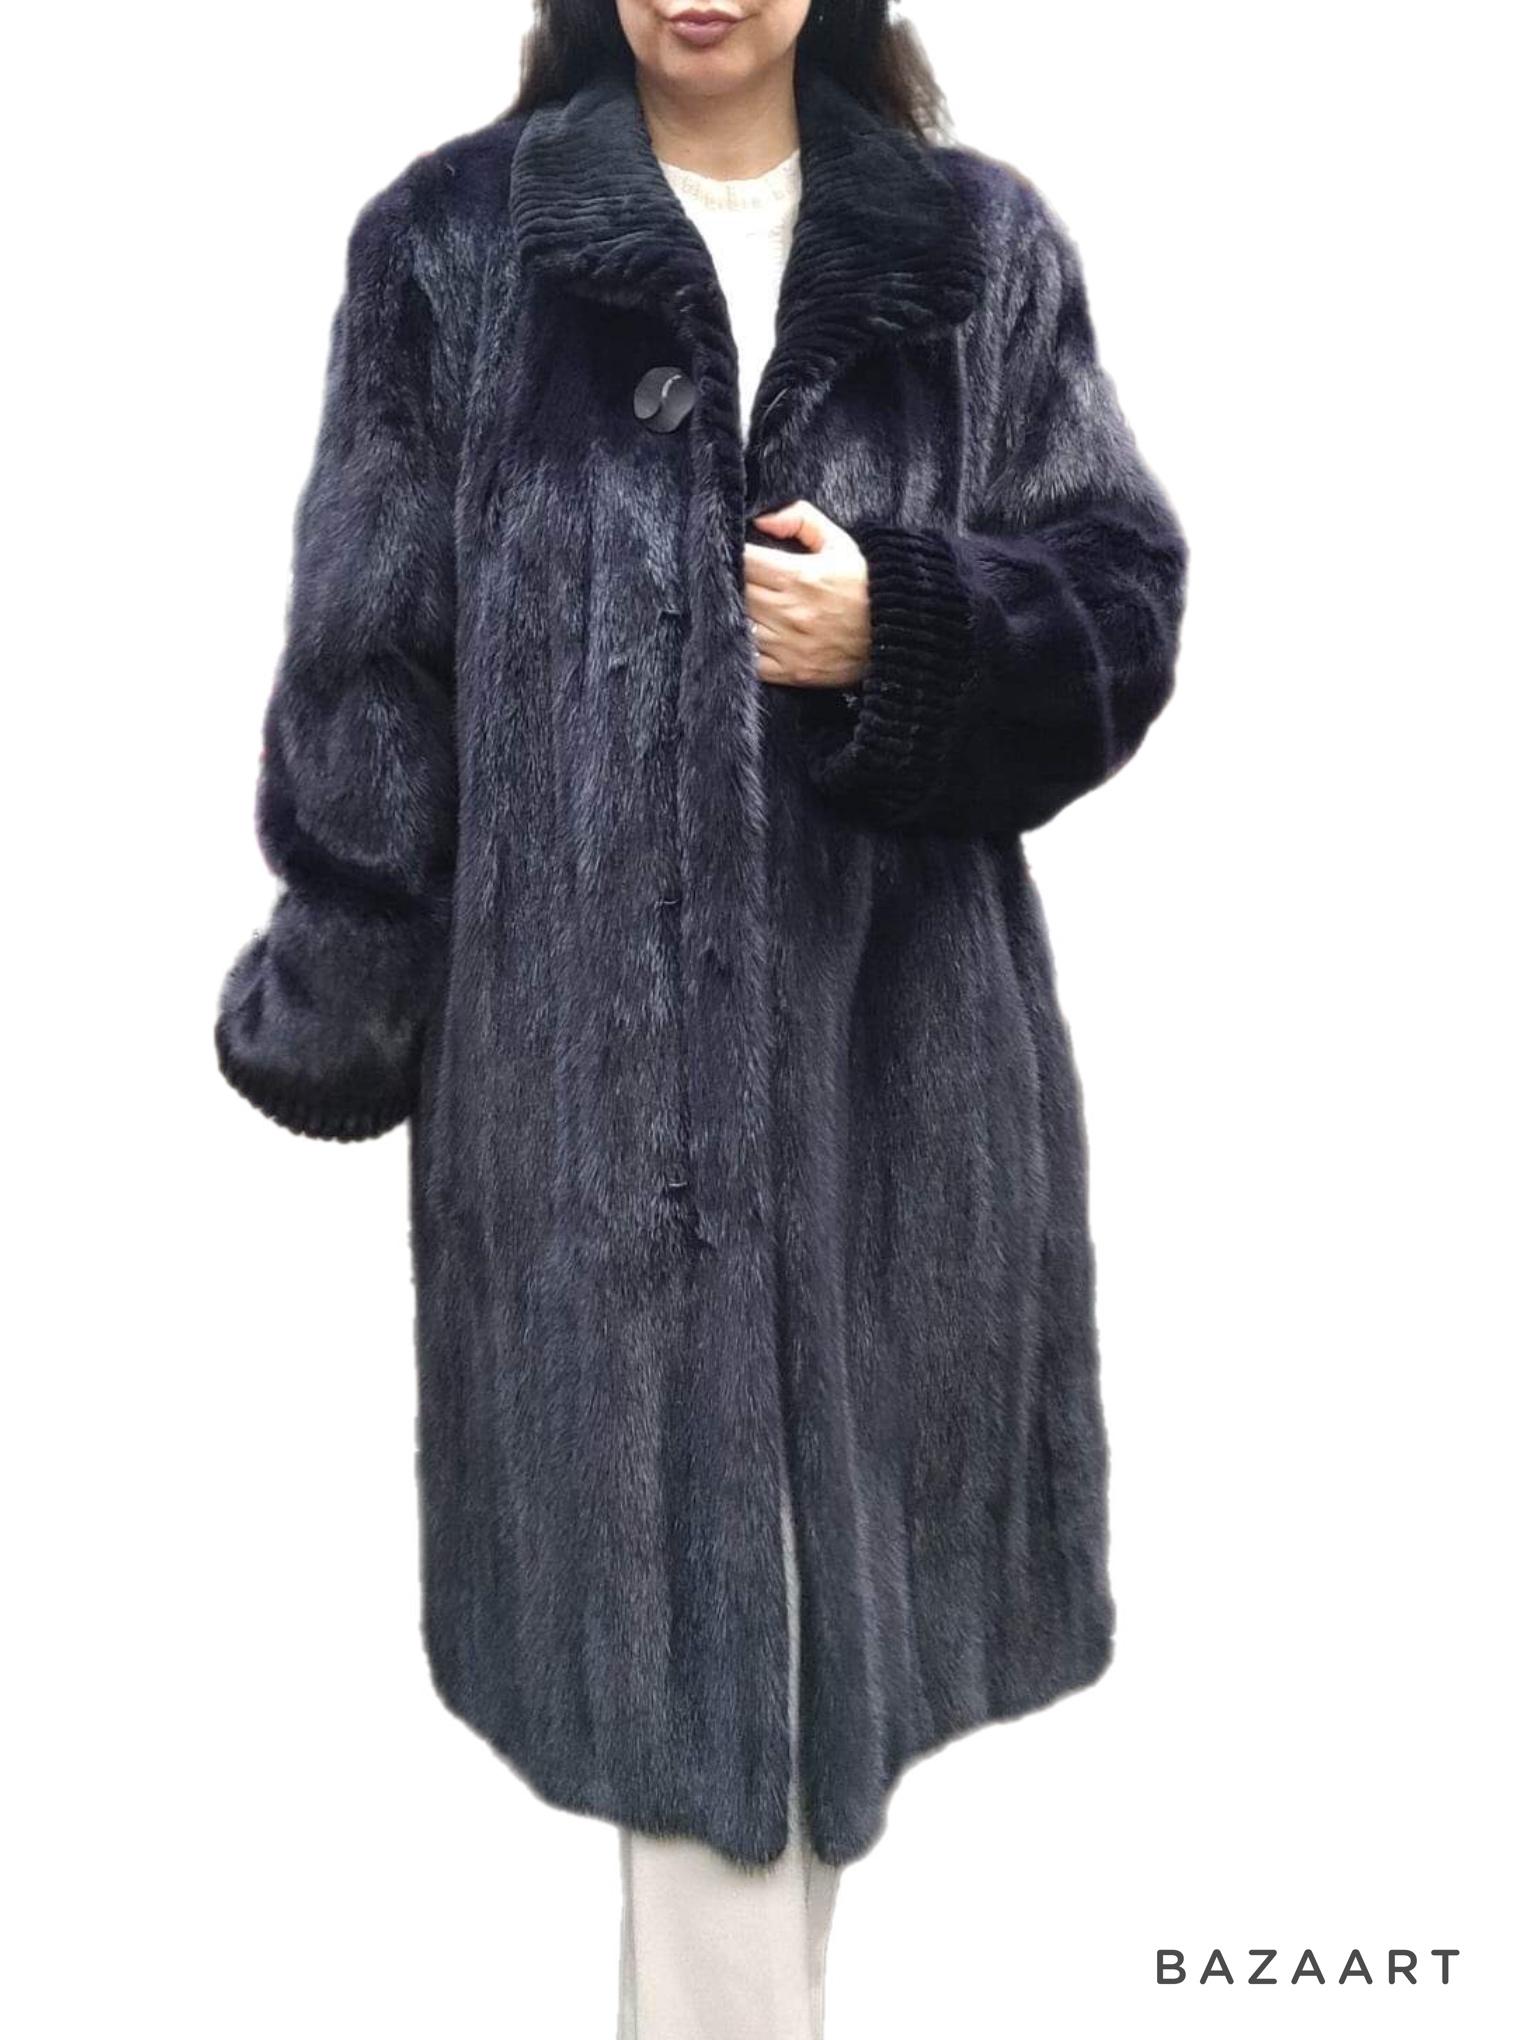 ~ Unused purple Mink Fur Coat (Size 12 - l) 

When it comes to fur, Canada Majestic is the ultimate reference in quality and style. This stunning blush coat is a classic with the stroller design and short collar stitching workmanship. It has a